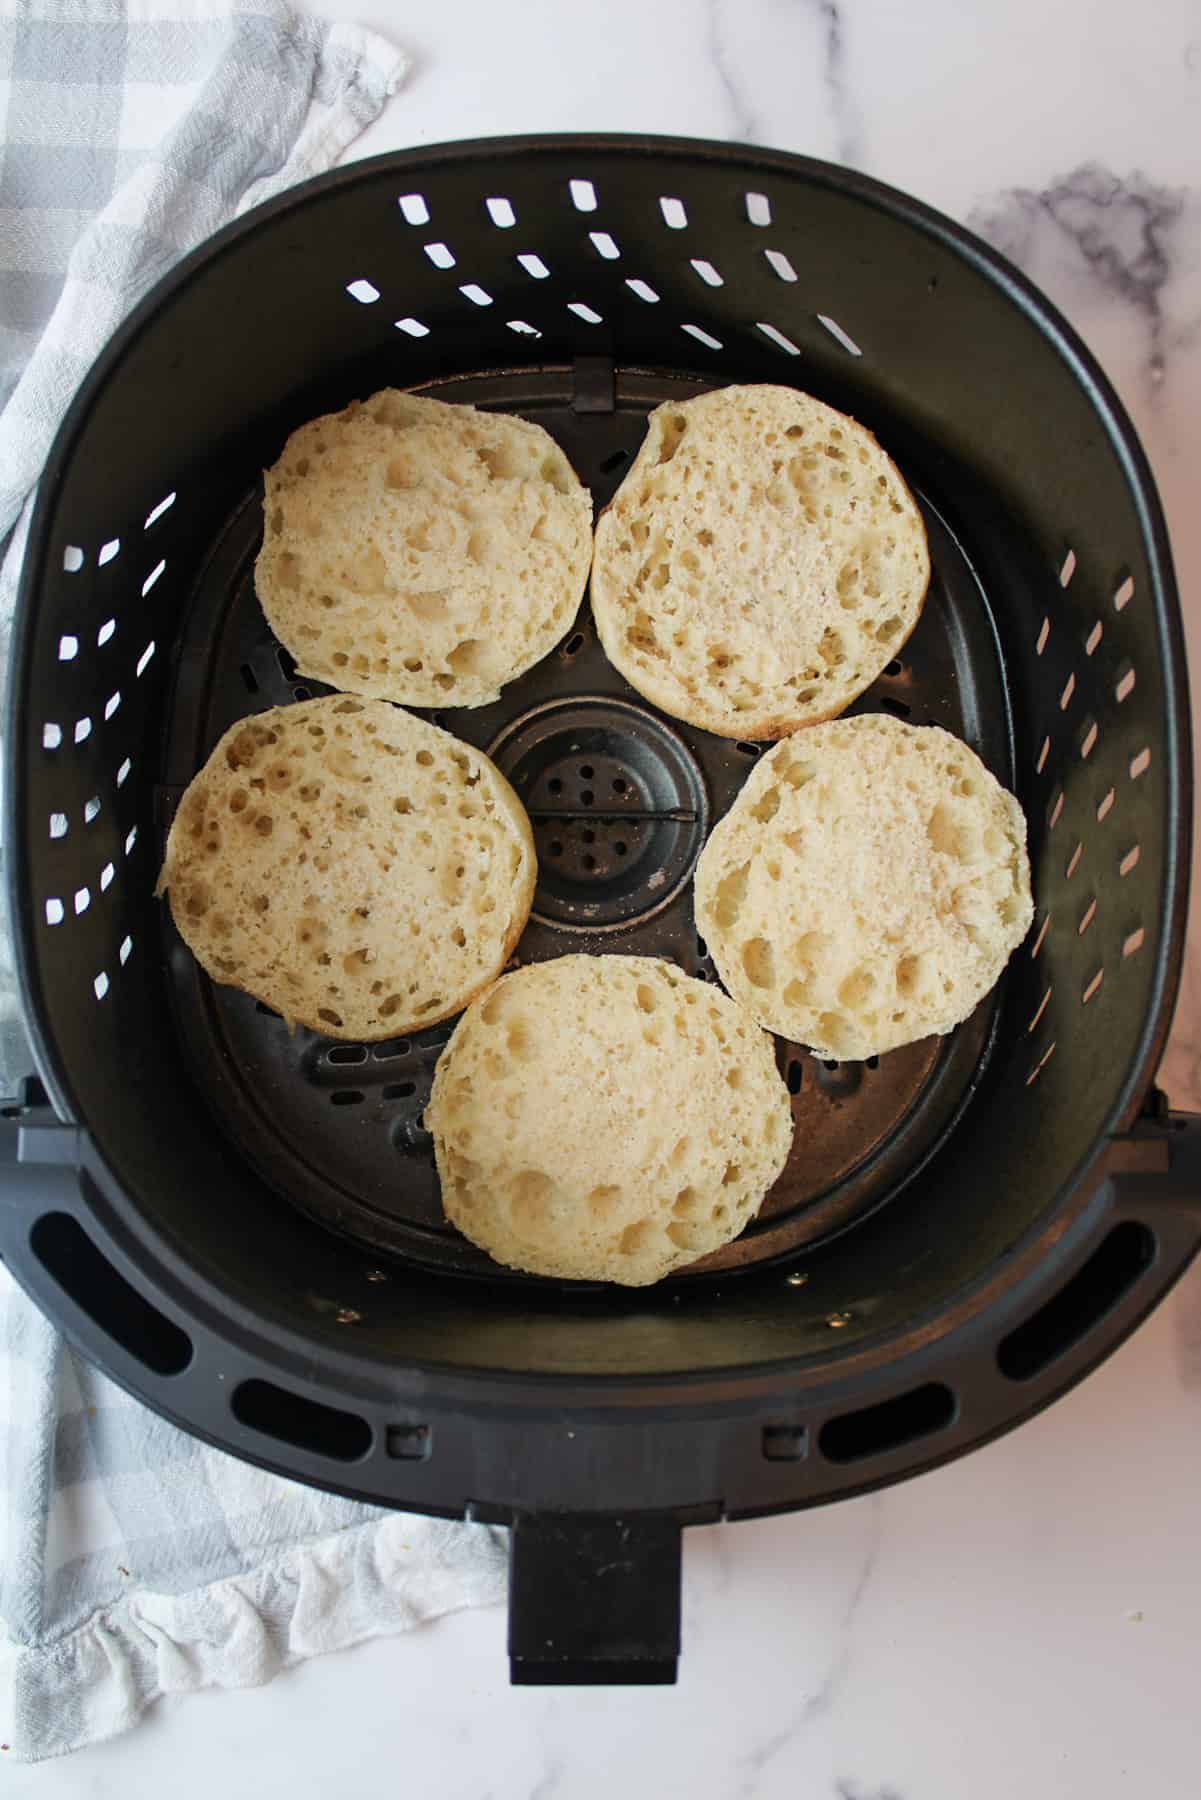 sliced english muffins in a air fryer basket.